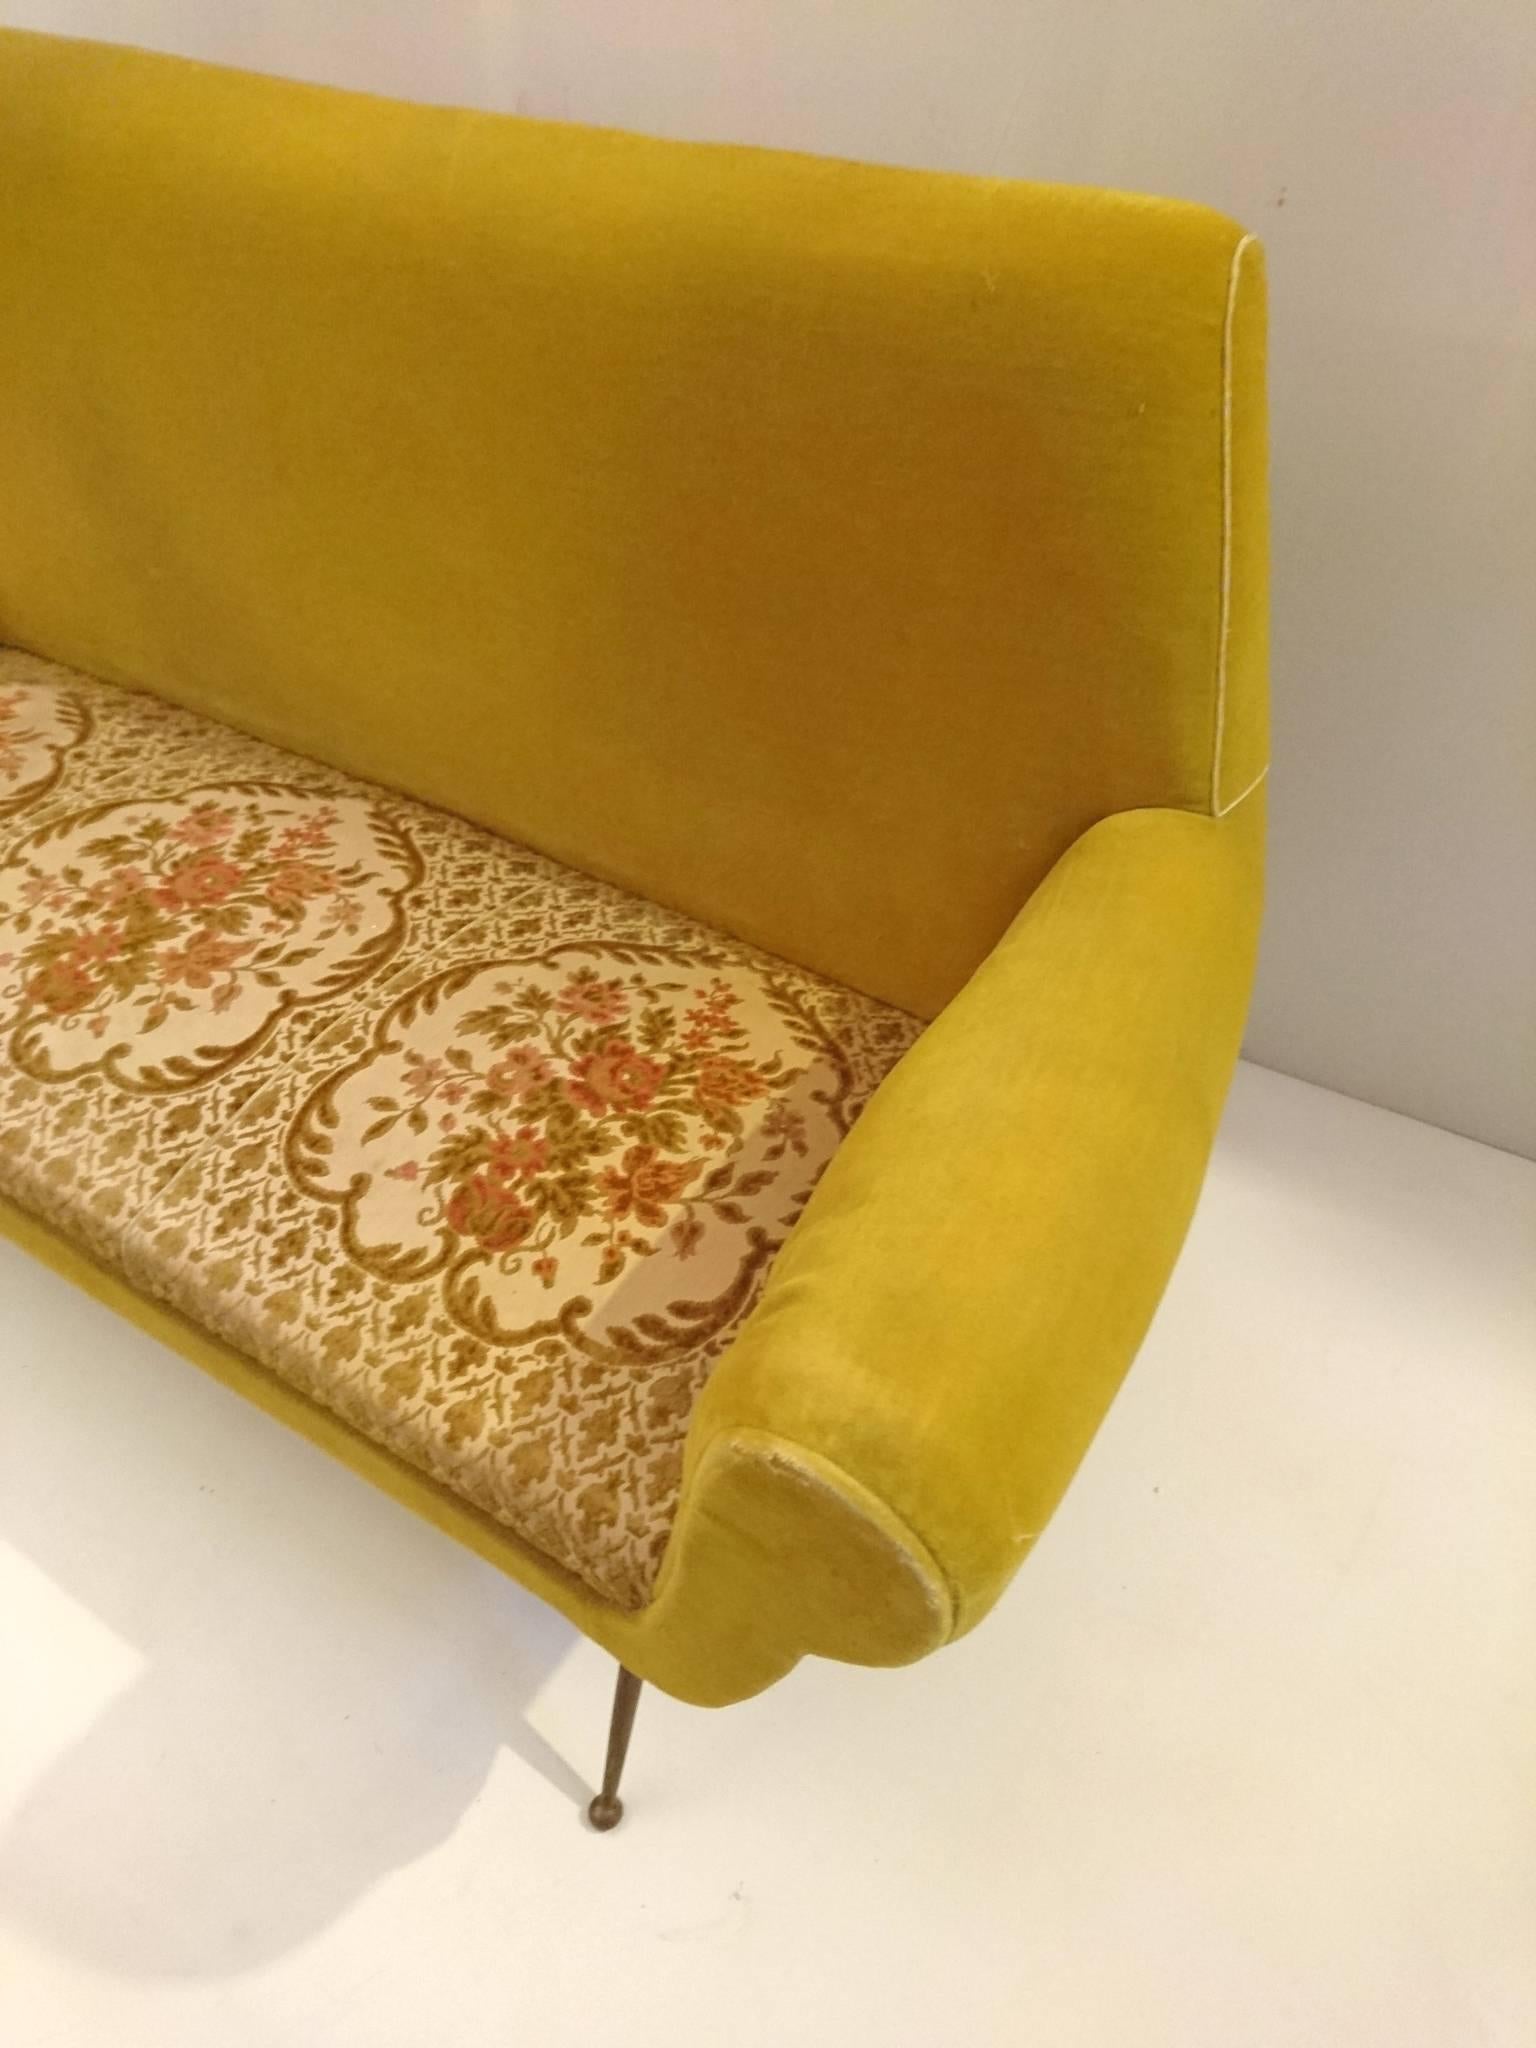 Classic sofa from the 1950s designed by Gigi Radice for Minotti. Good sound structure with iconic spider legs in solid brass. The sofa is now covered in the original mohair but is in need of reupholstery work. For a quote please send us an email and